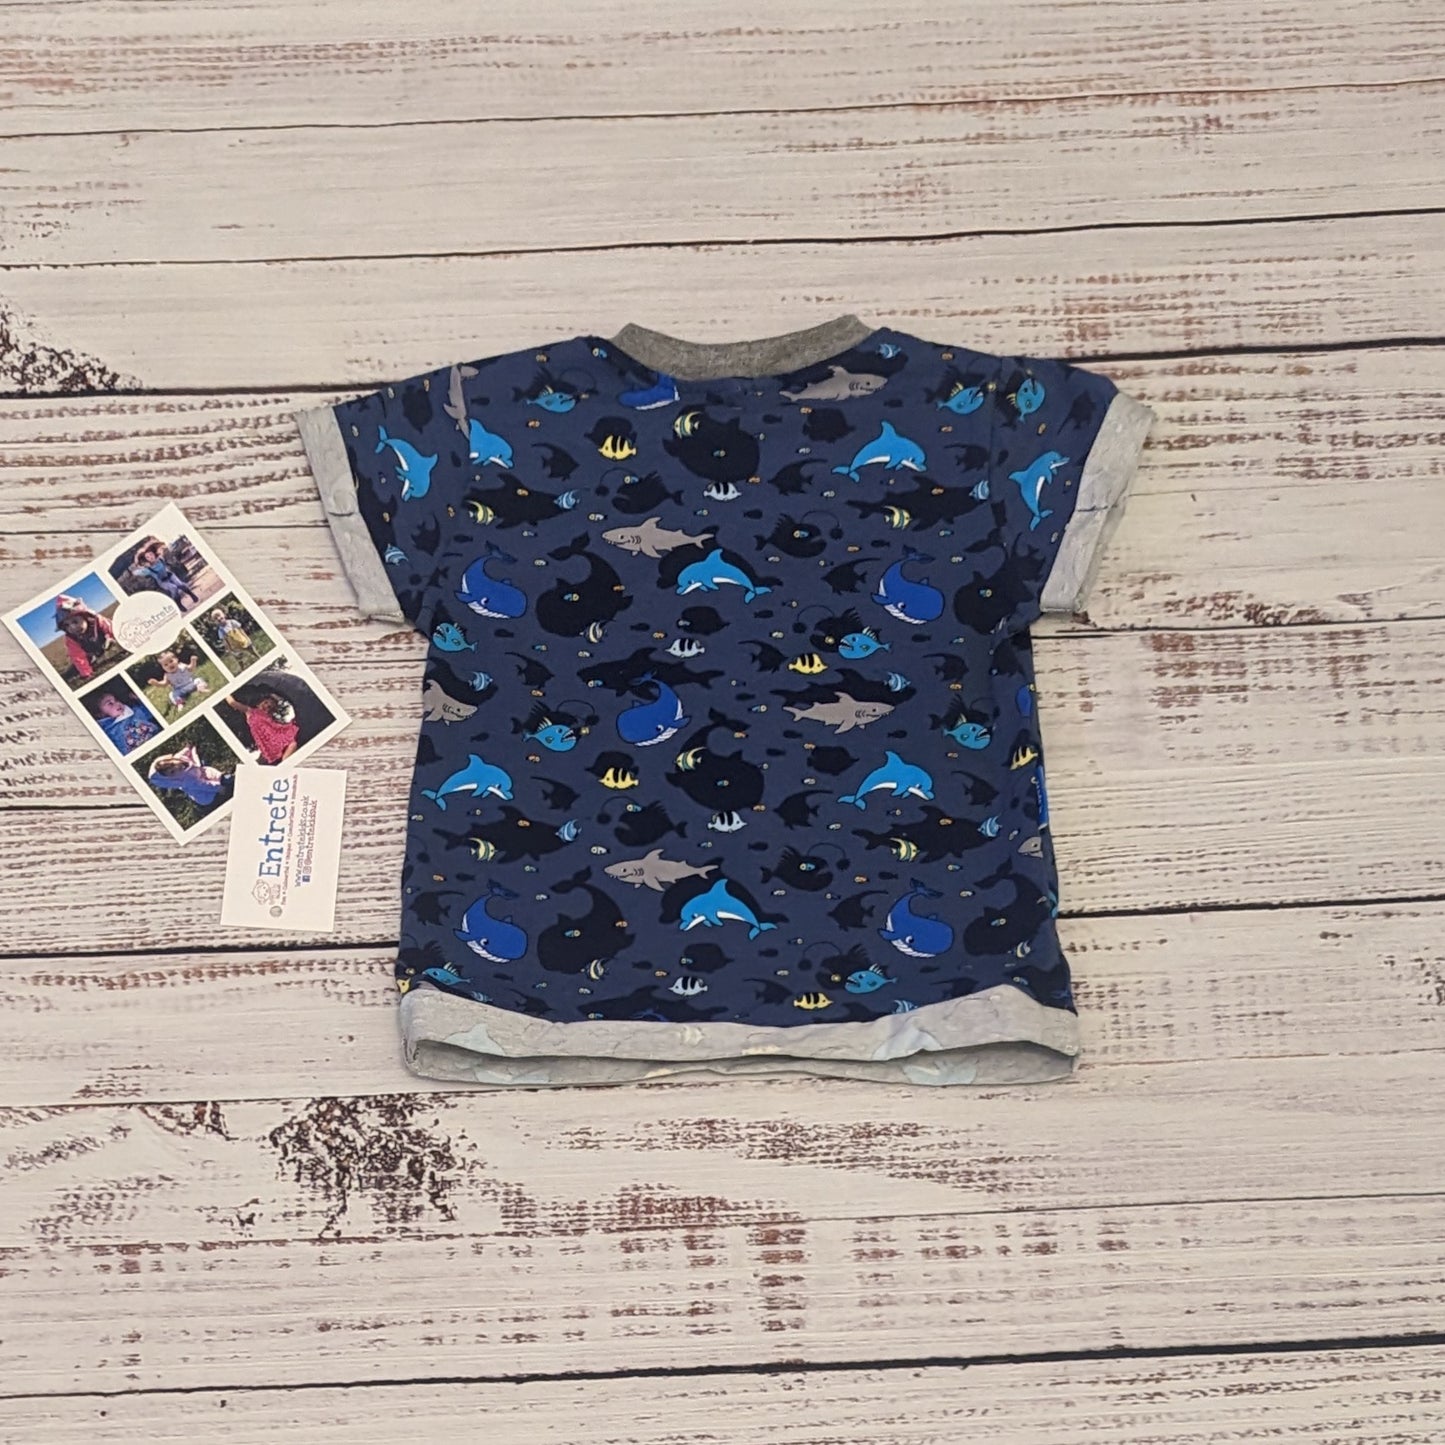 The short sleeved navy sea life shadows T-shirt. Handmade using navy sea life shadows cotton jersey and grey cotton ribbing. Shown from the rear.